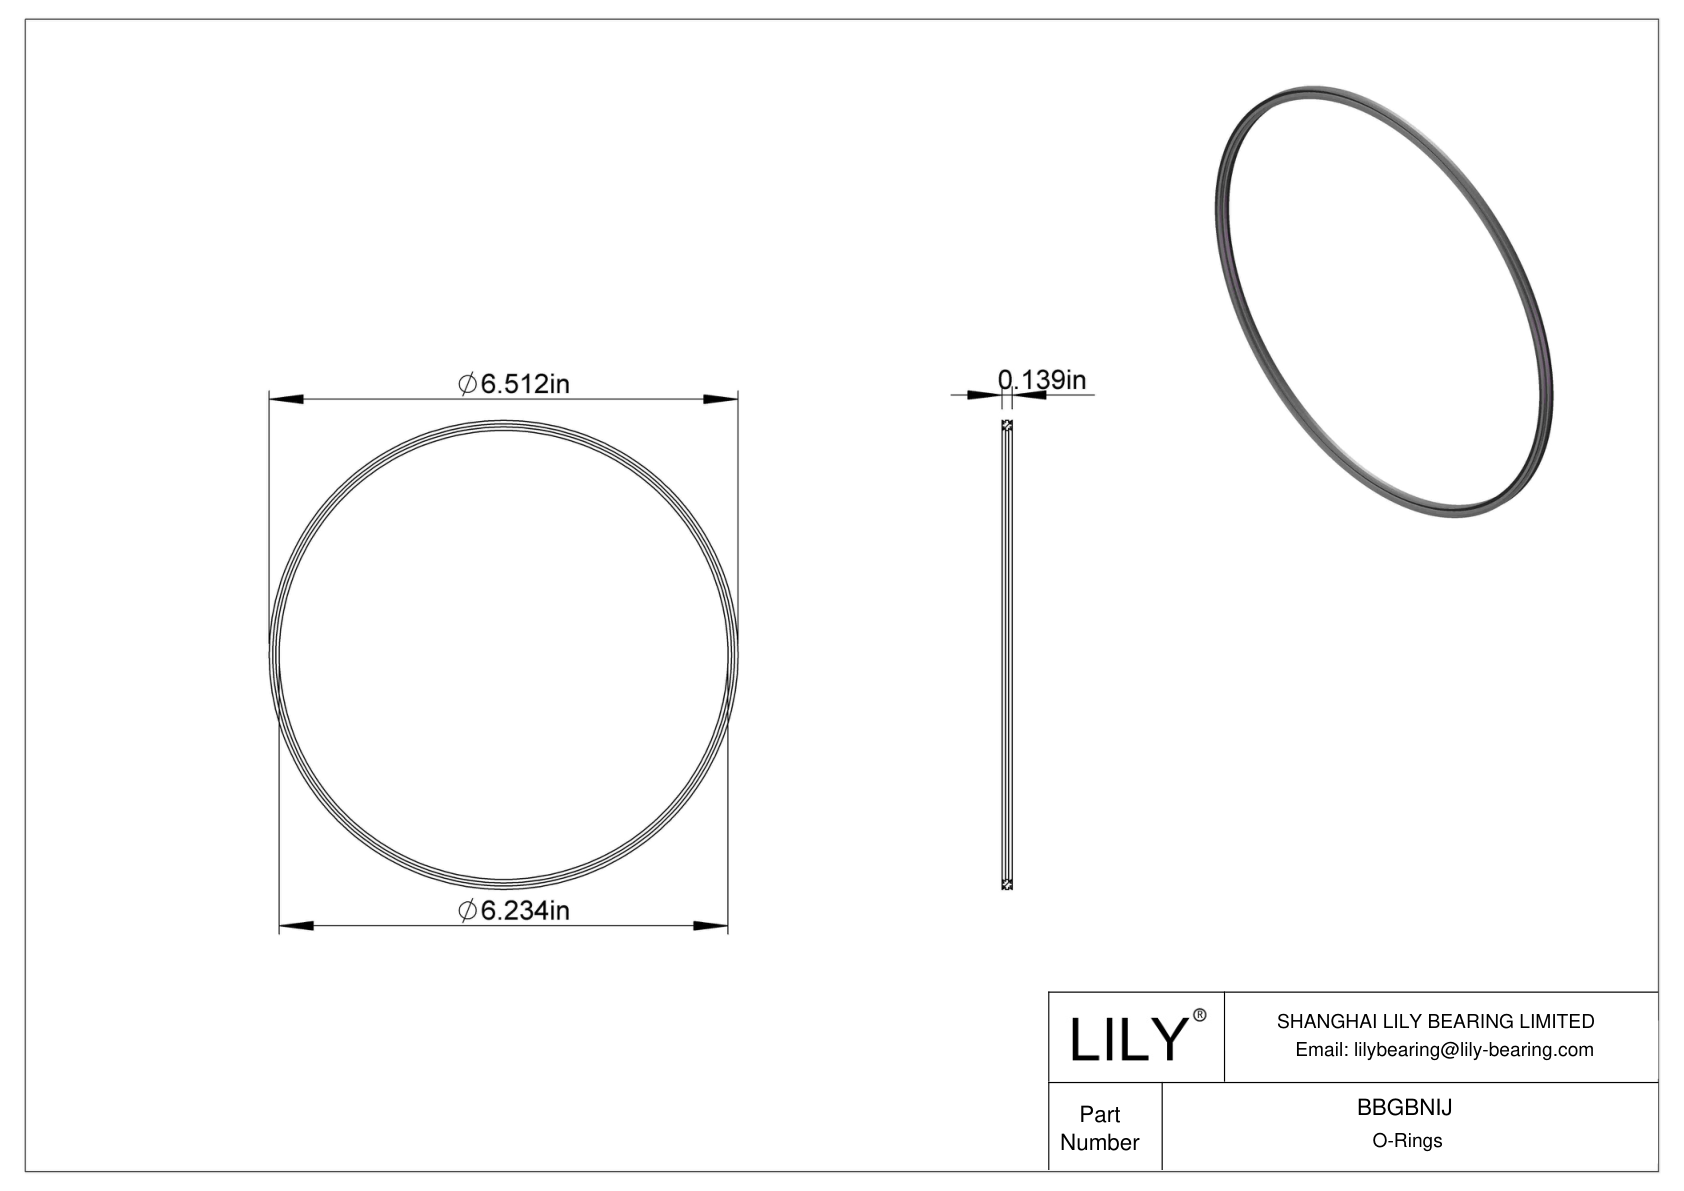 BBGBNIJ Oil Resistant O-Rings Double X cad drawing